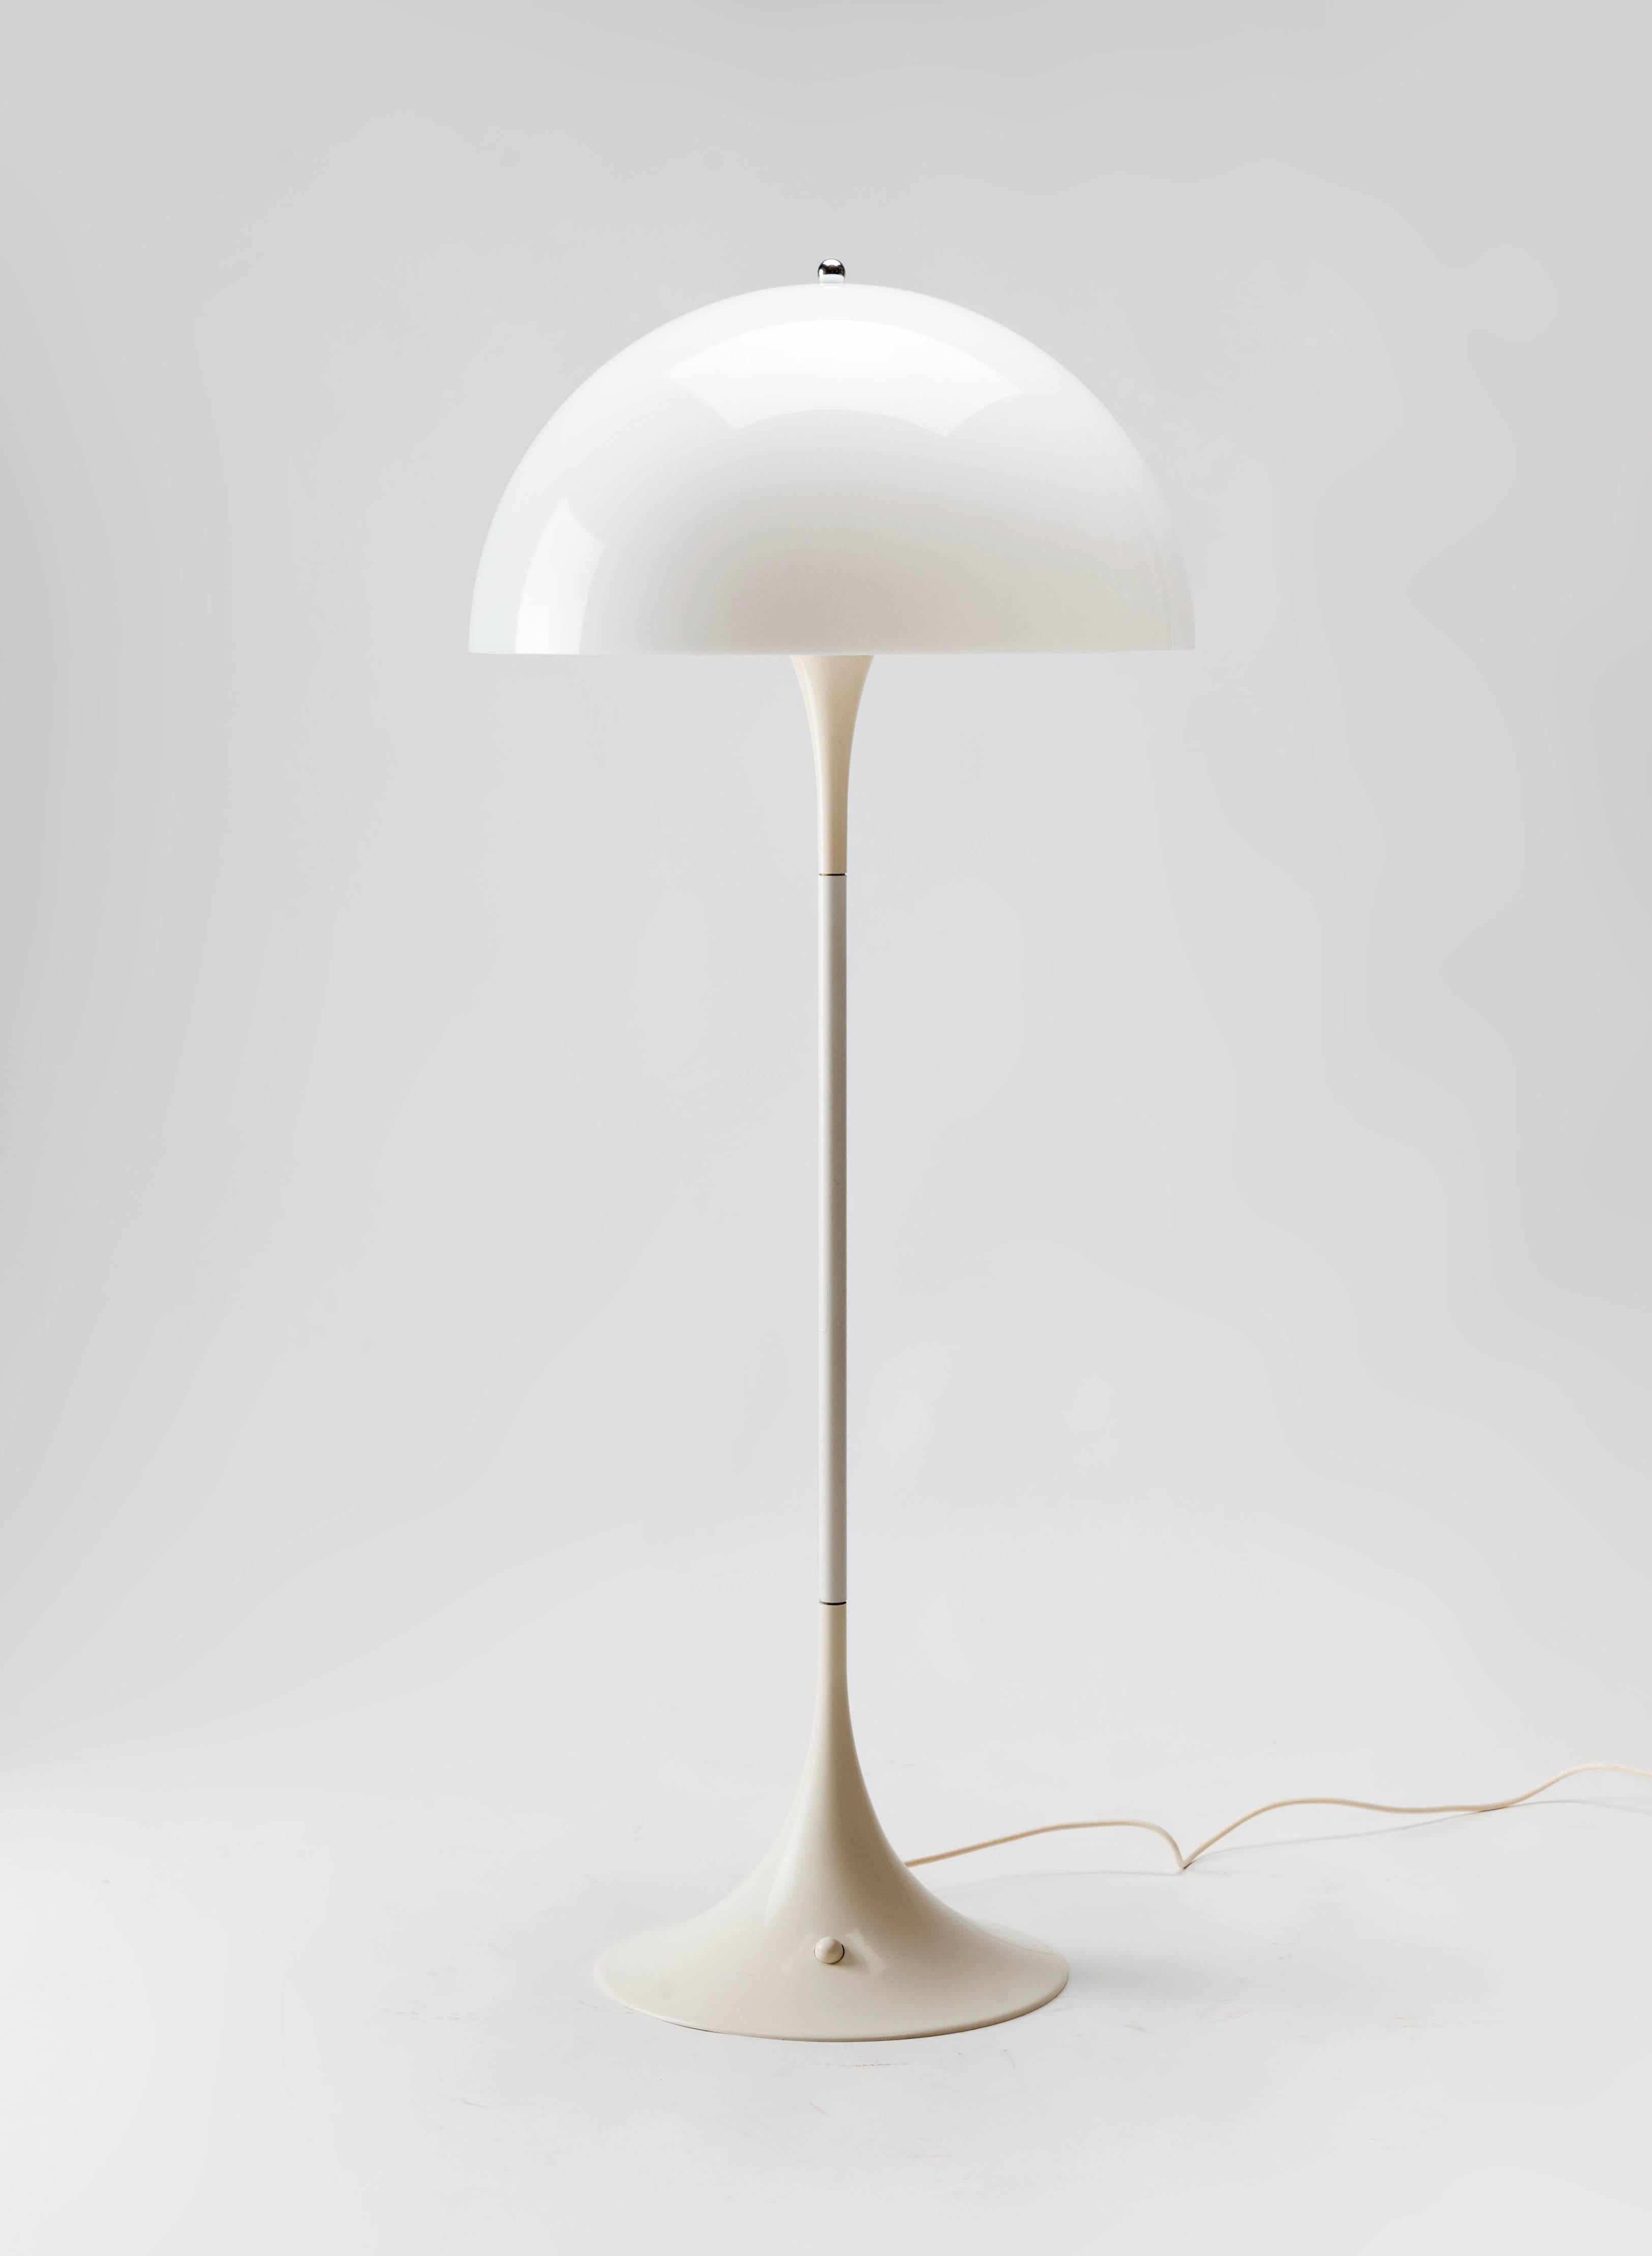 Panthella floor lamp designed by Verner Panton in 1971 and manufactured by Louis Poulsen in the later 1970s.
The shade is made of acrylic, the stem of white lacquered steel with a plastic base.
Panthella is known for it's pretty, ambient glow when